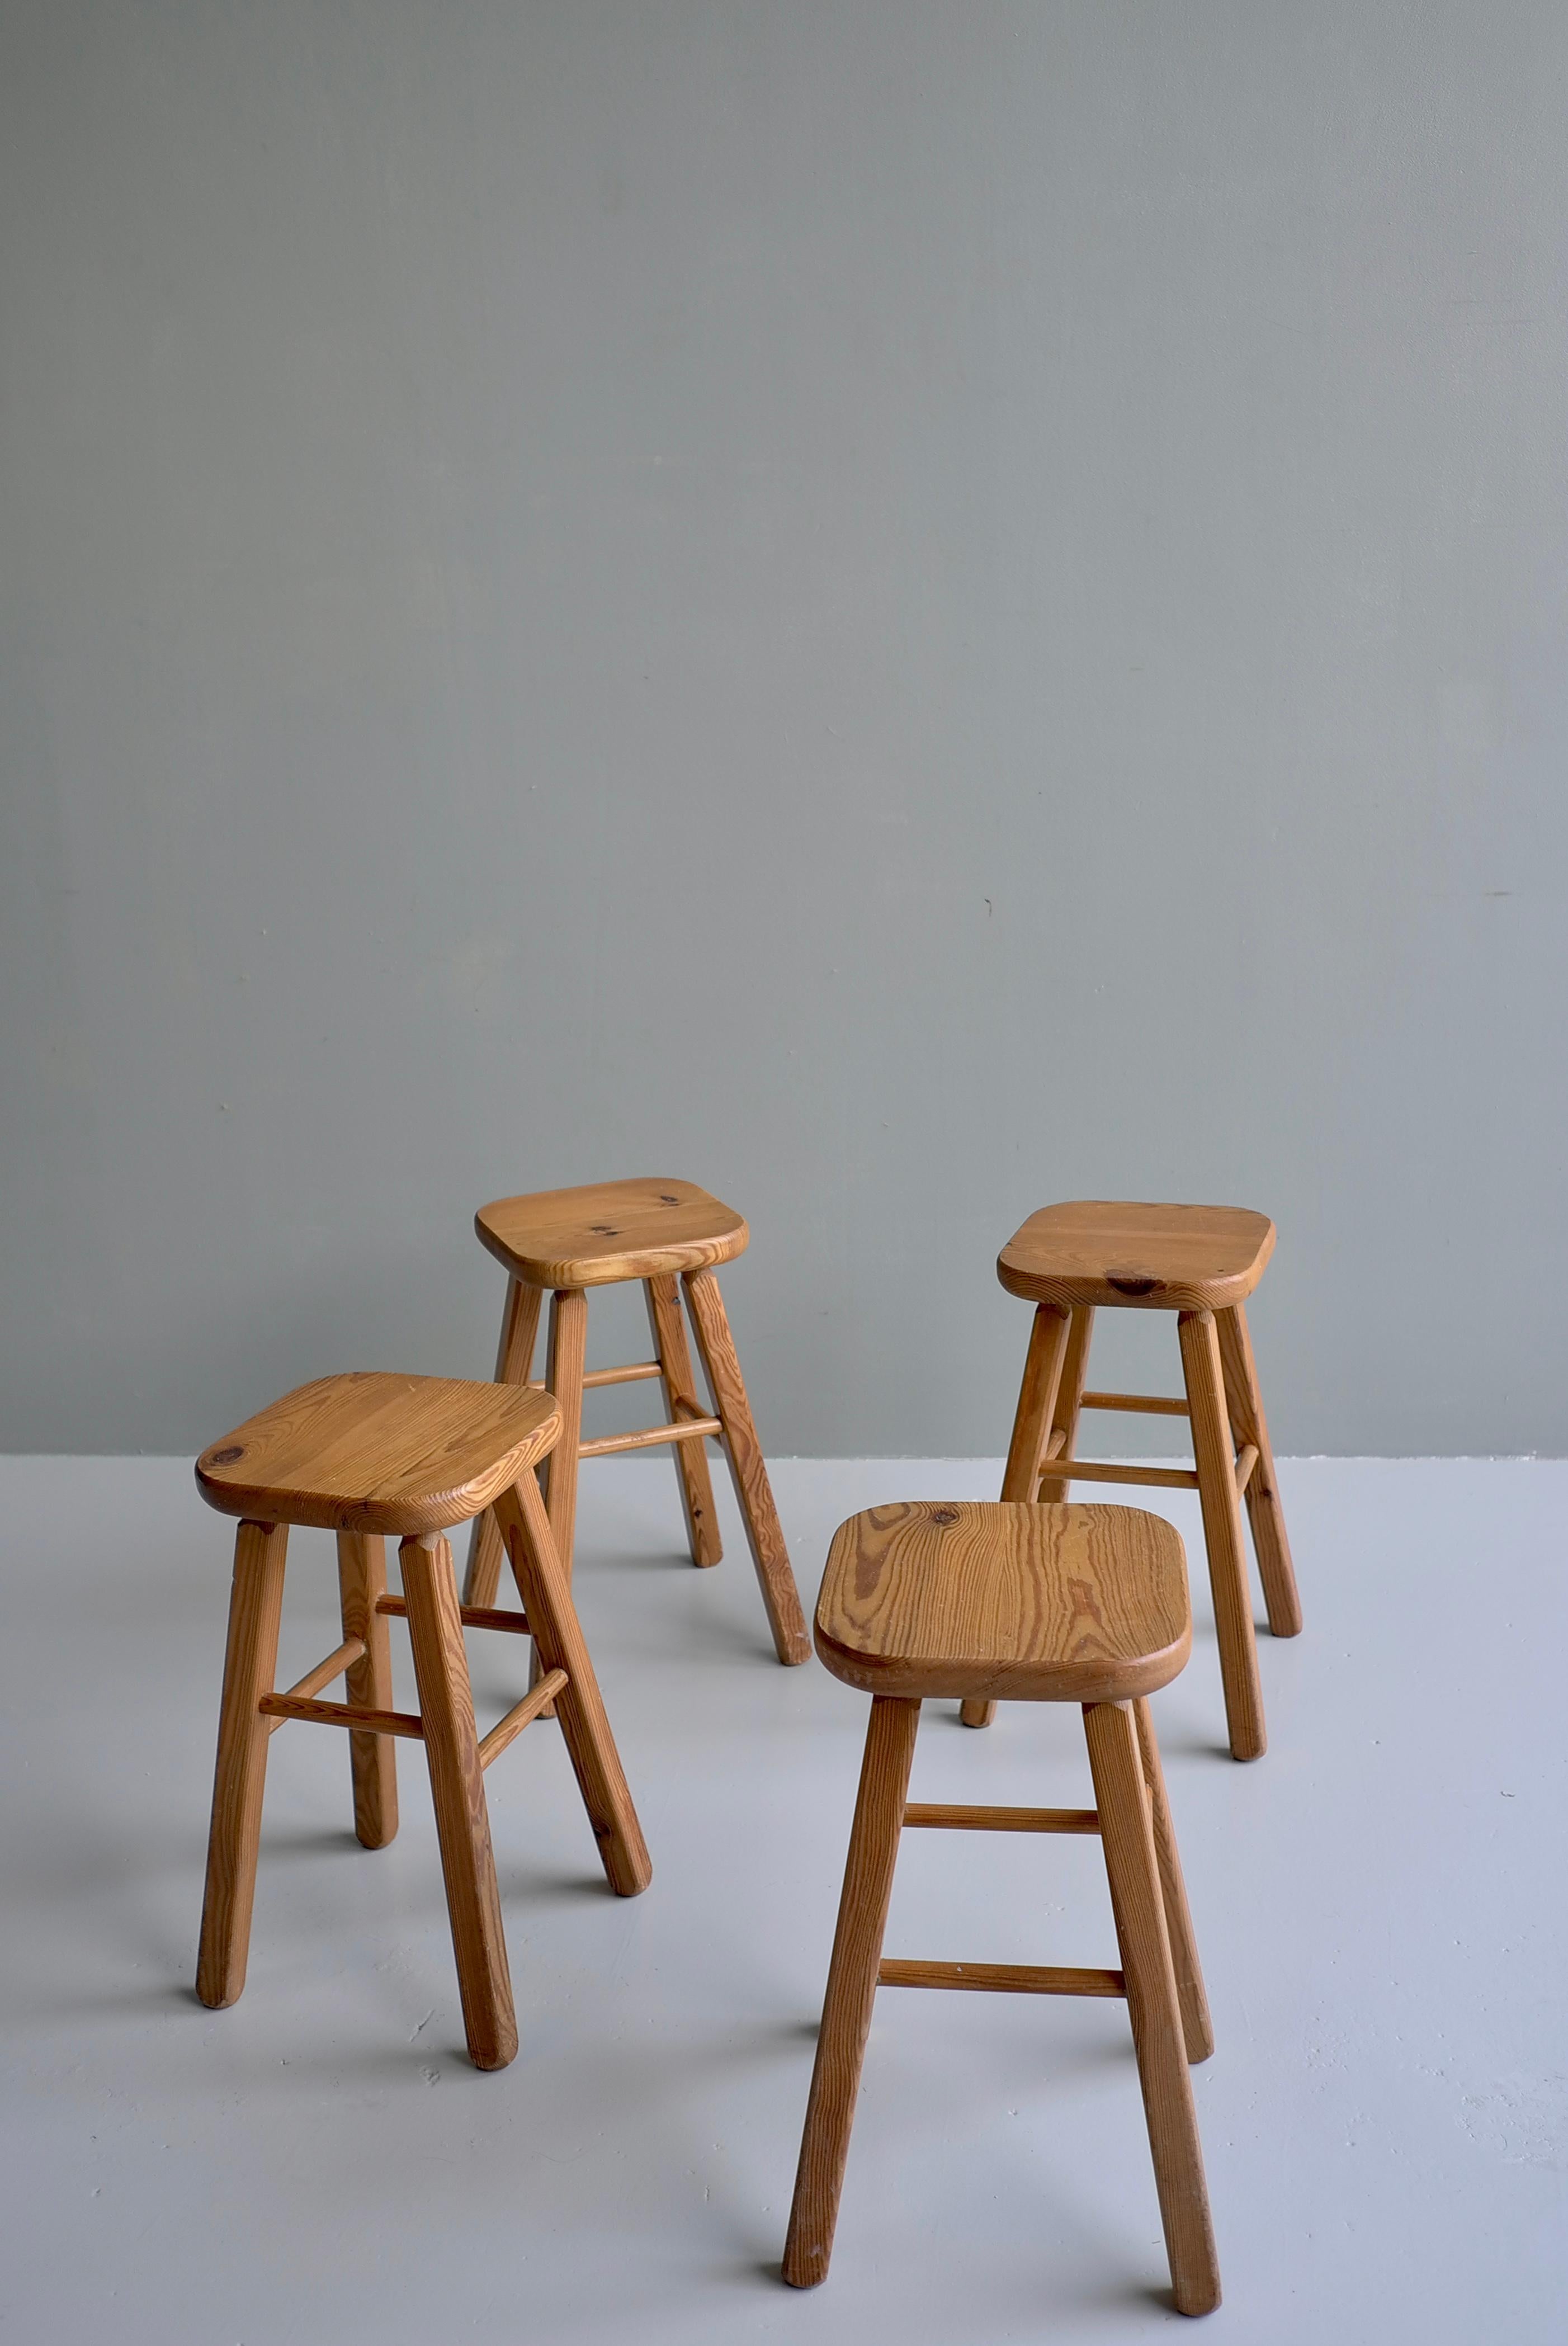 Mid-Century Modern Solid Pine Stools in style of Charlotte Perriand, France 1960's For Sale